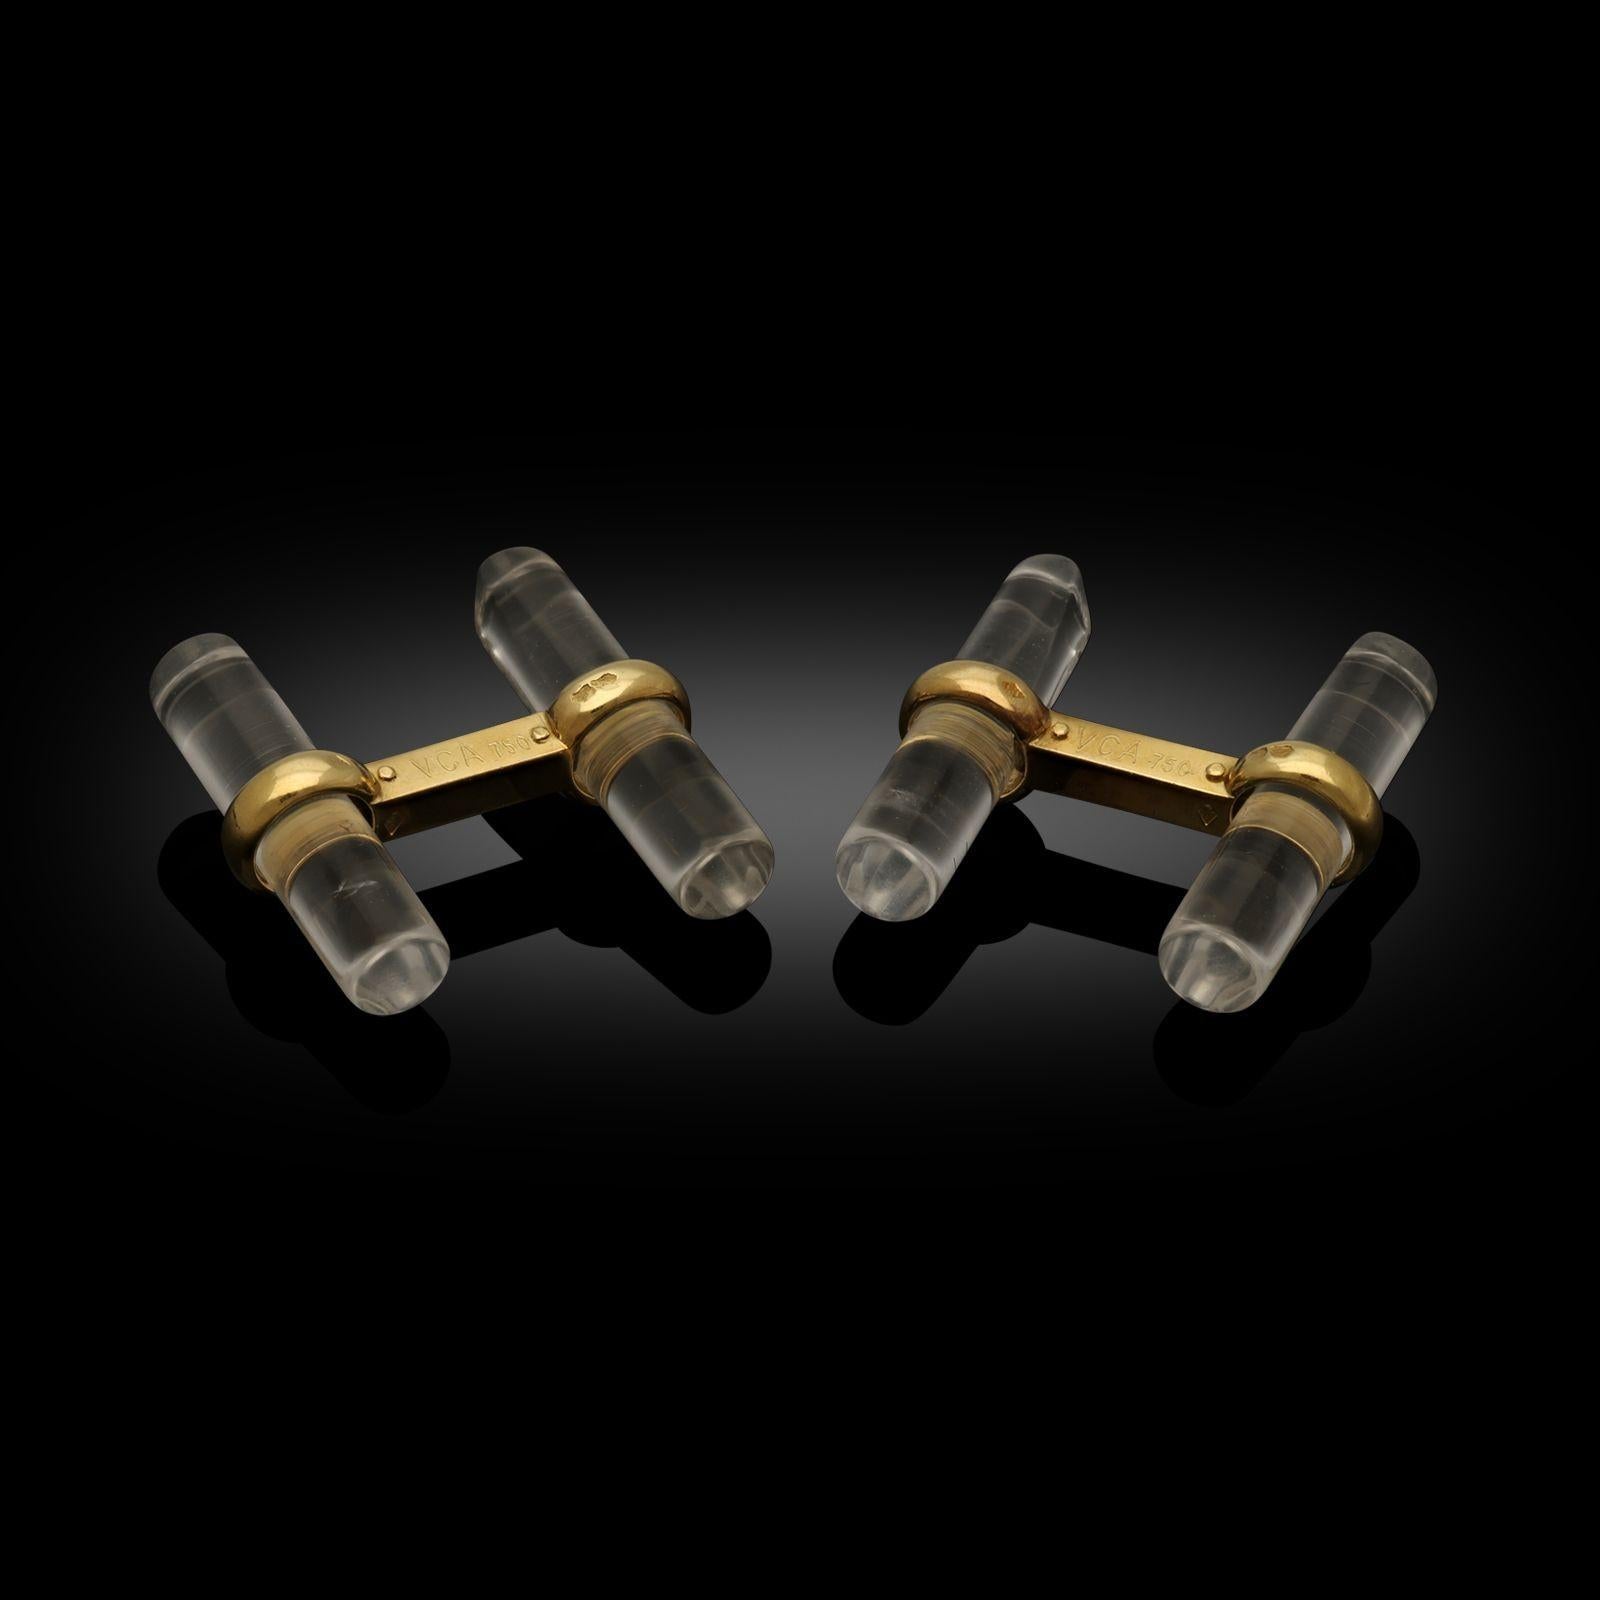 Van Cleef & Arpels 18ct Gold Baton Cufflinks With Interchangeable Ends Ca 1972 In Good Condition For Sale In London, GB